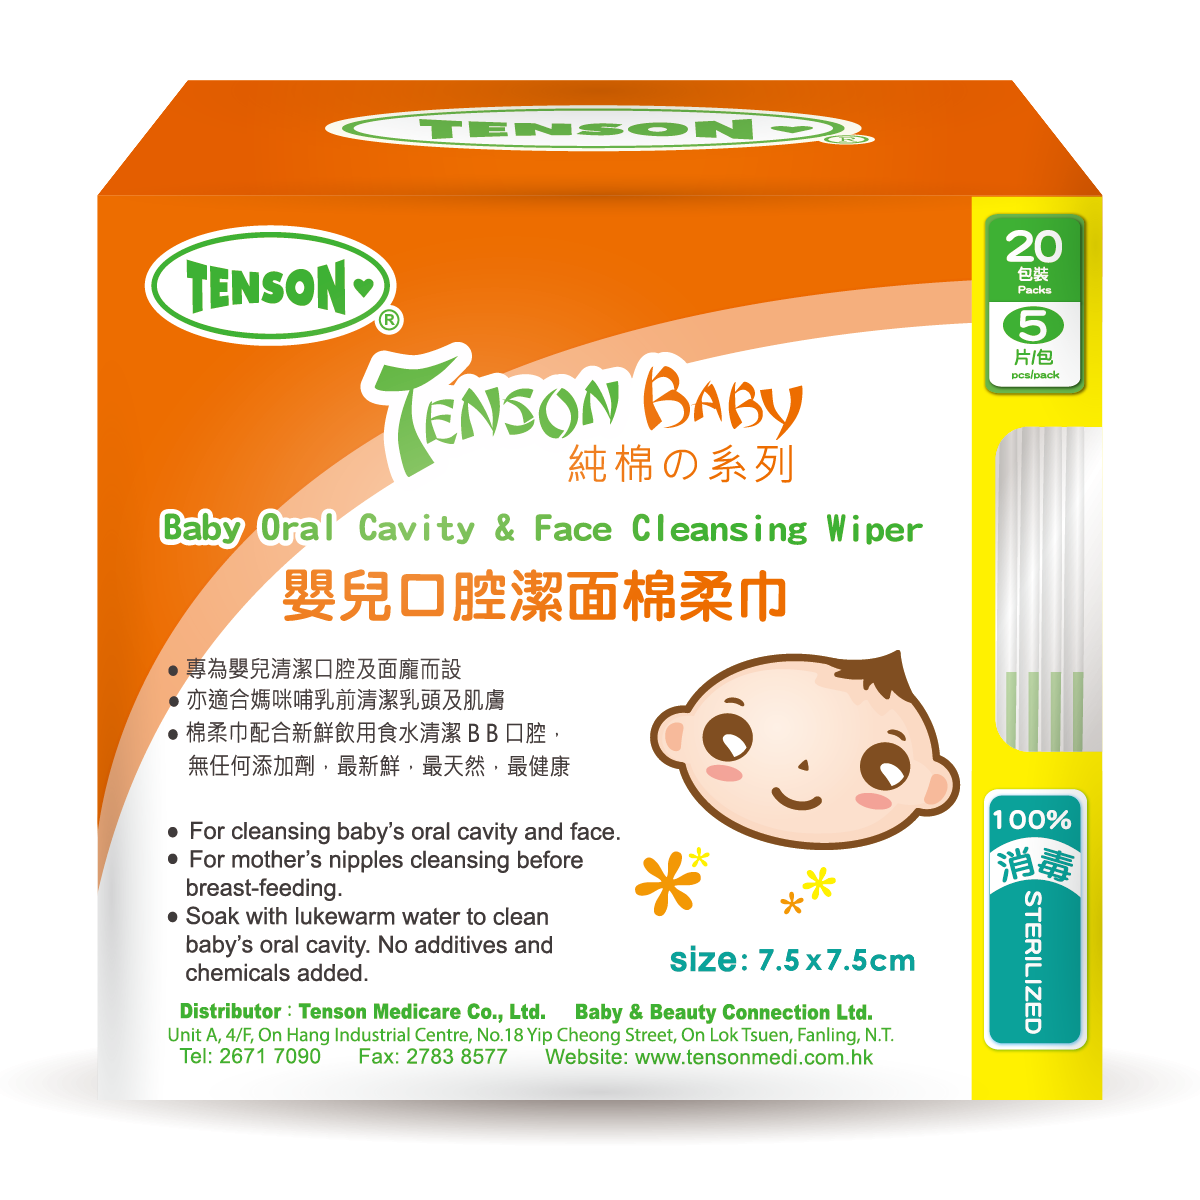 Tenson Baby Oral Cavity & Face Cleansing Wiper 20packs